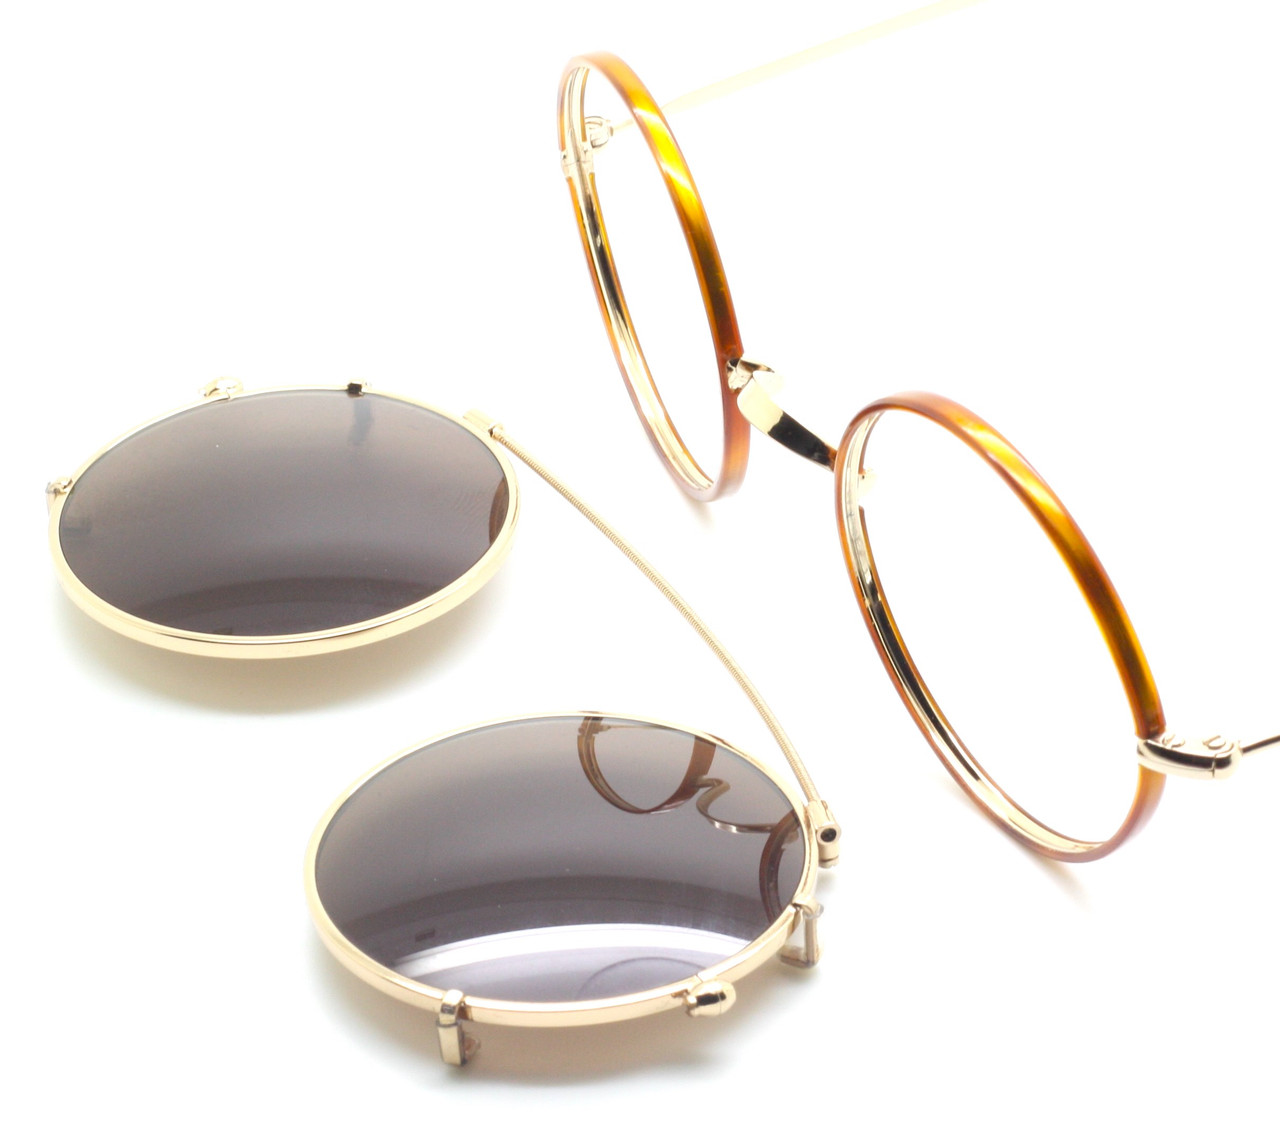 Beuren 1700w Round Eyewear With Tortoiseshell Rims And Matching Sun Clip At The Old Glasses Shop Ltd